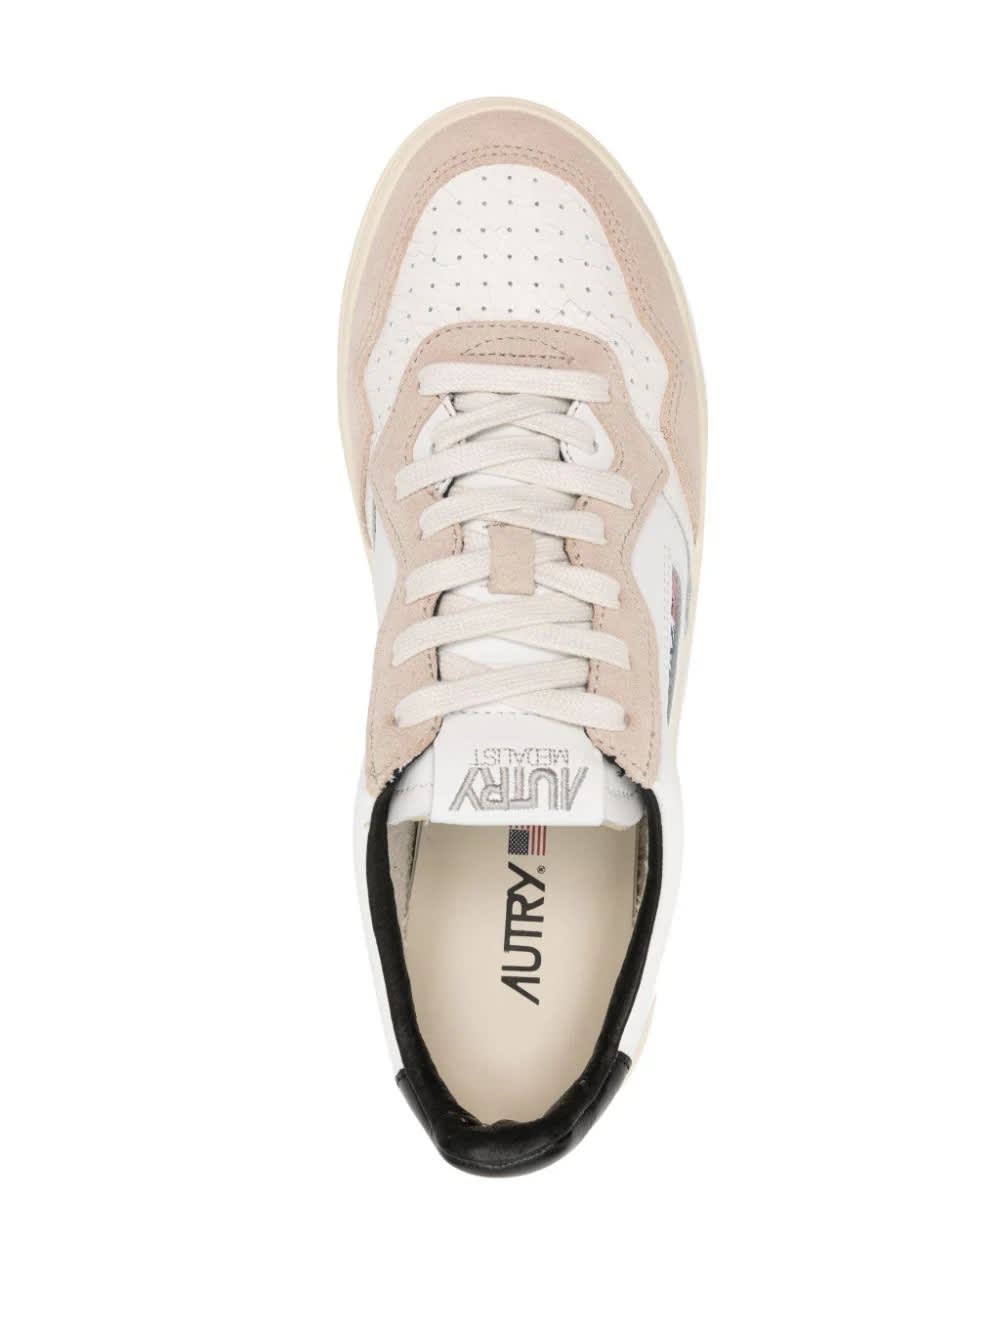 Shop Autry Medalist Low Sneakers In White And Black Suede And Leather